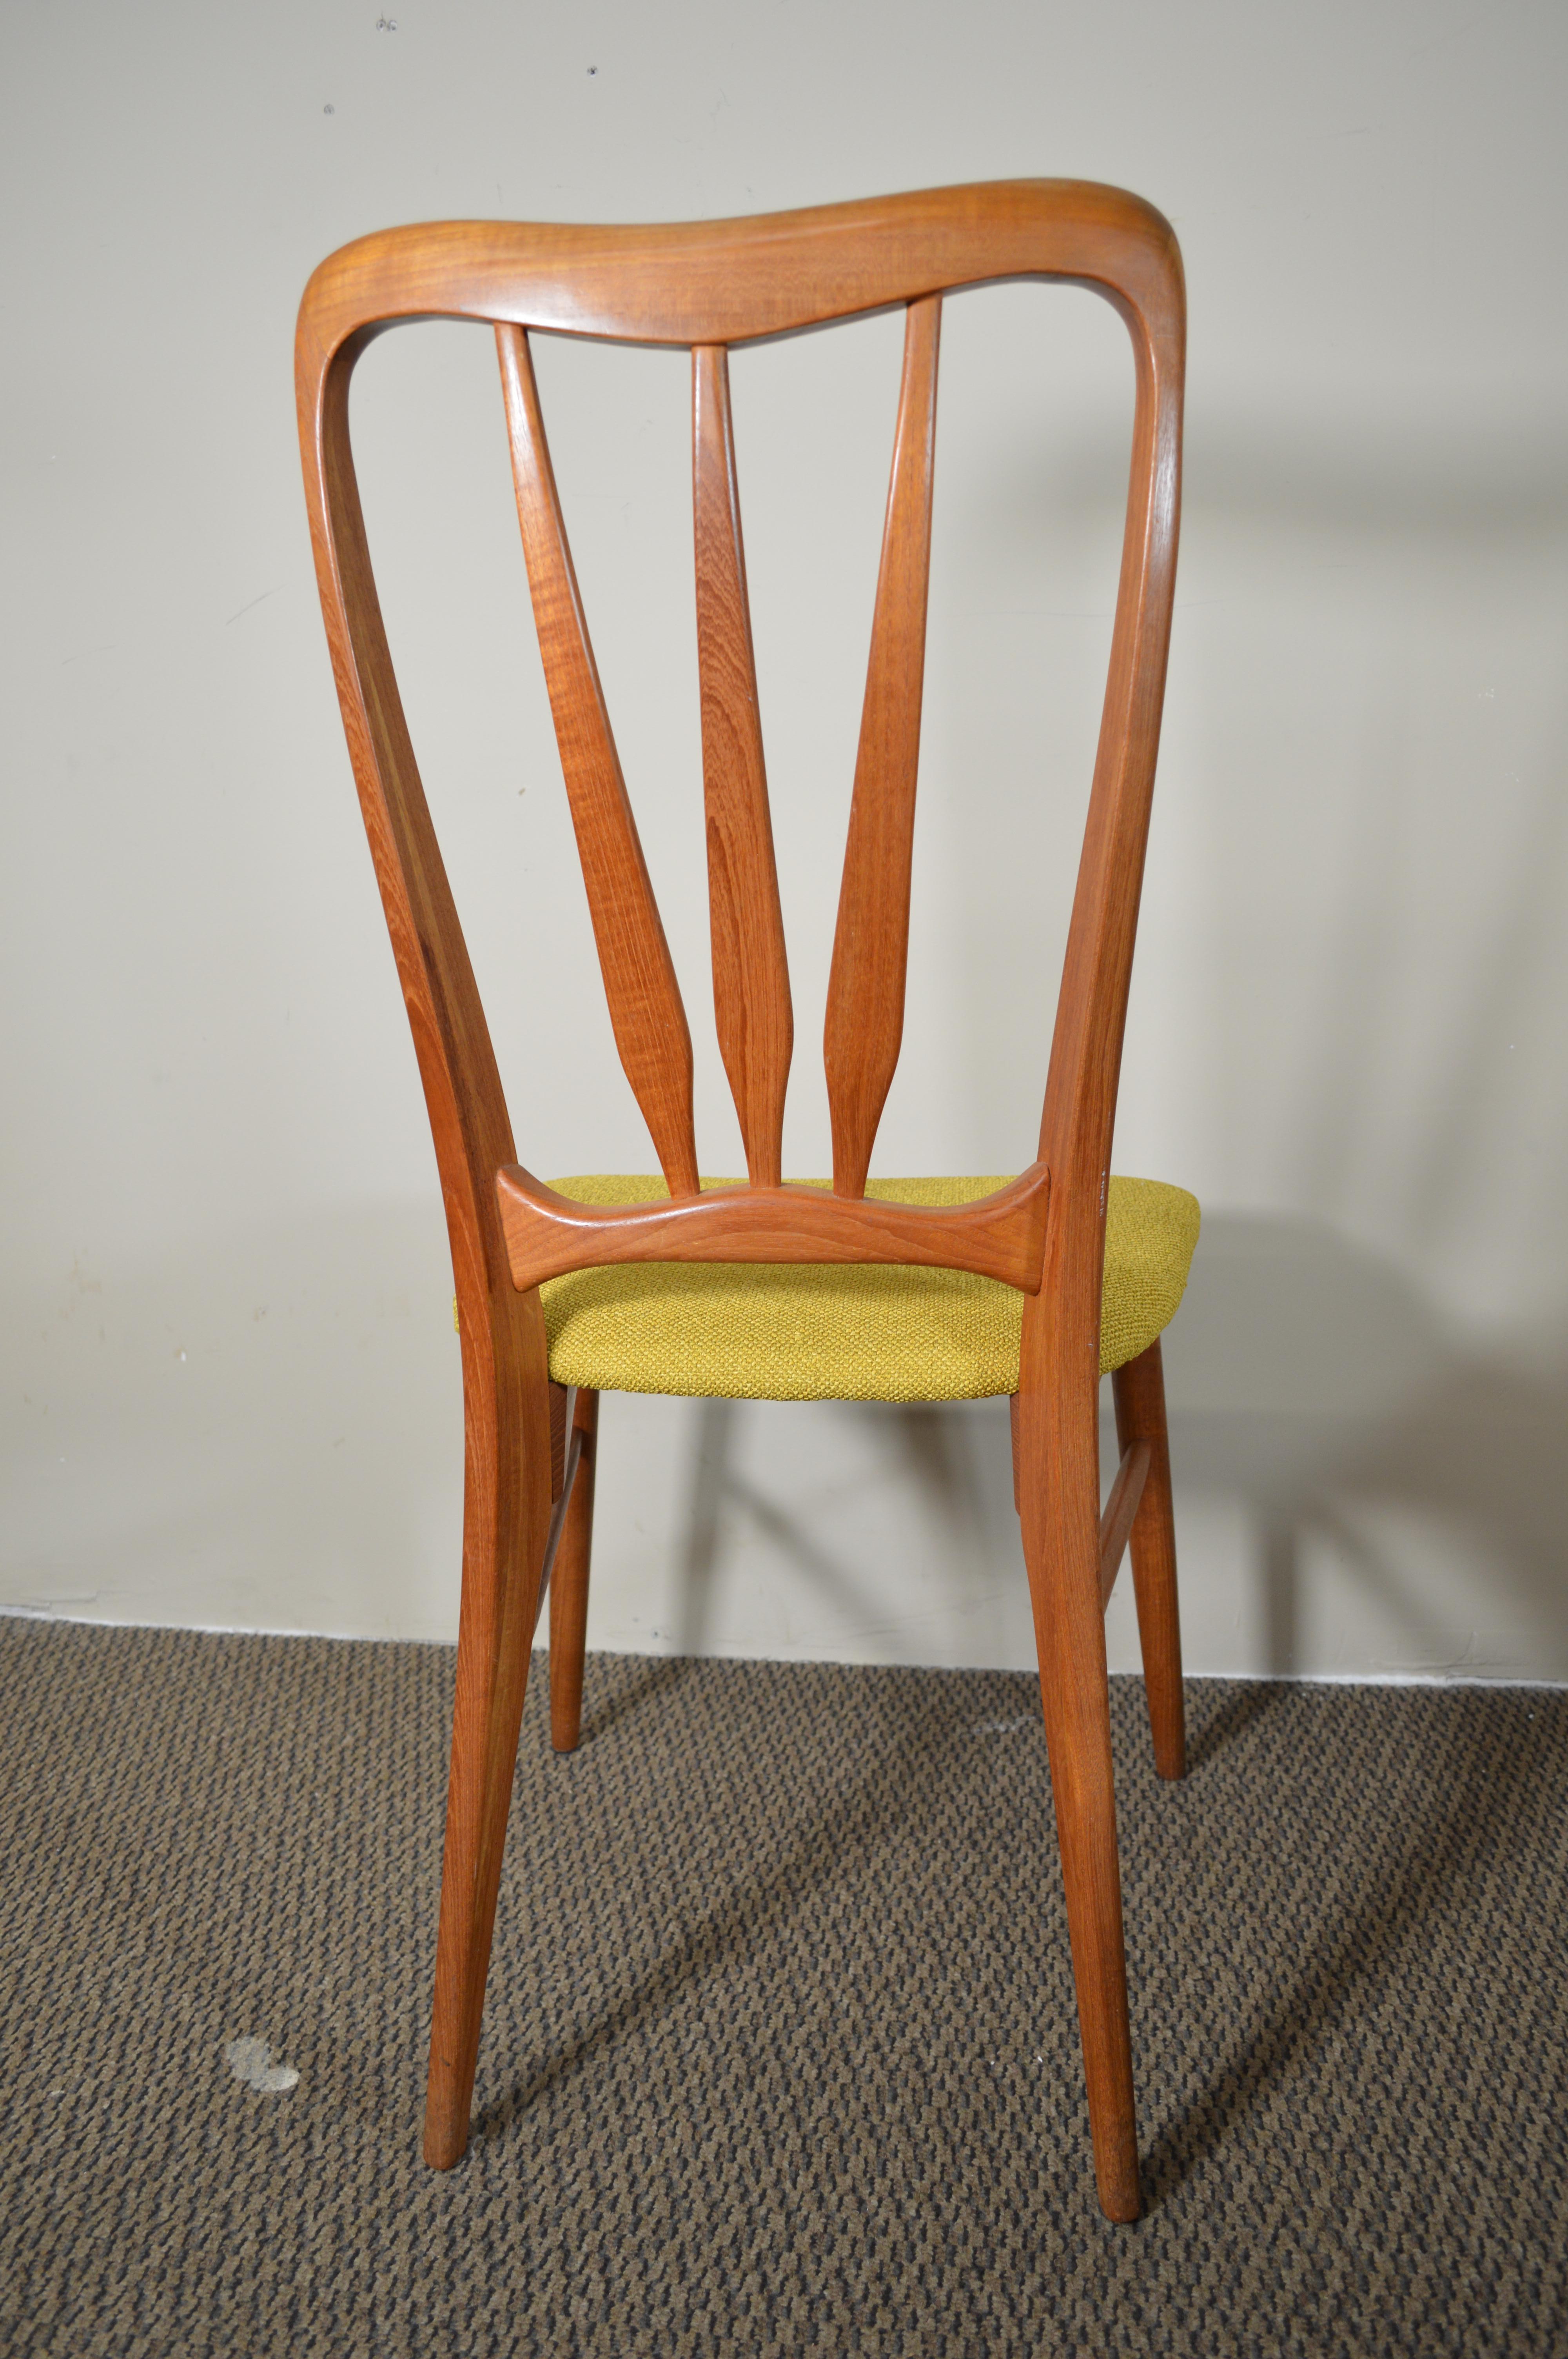 4 Midcentury Danish Modern Teak Dining Ingrid Chairs by Koefoeds Hornslet In Good Condition For Sale In Norcross, GA